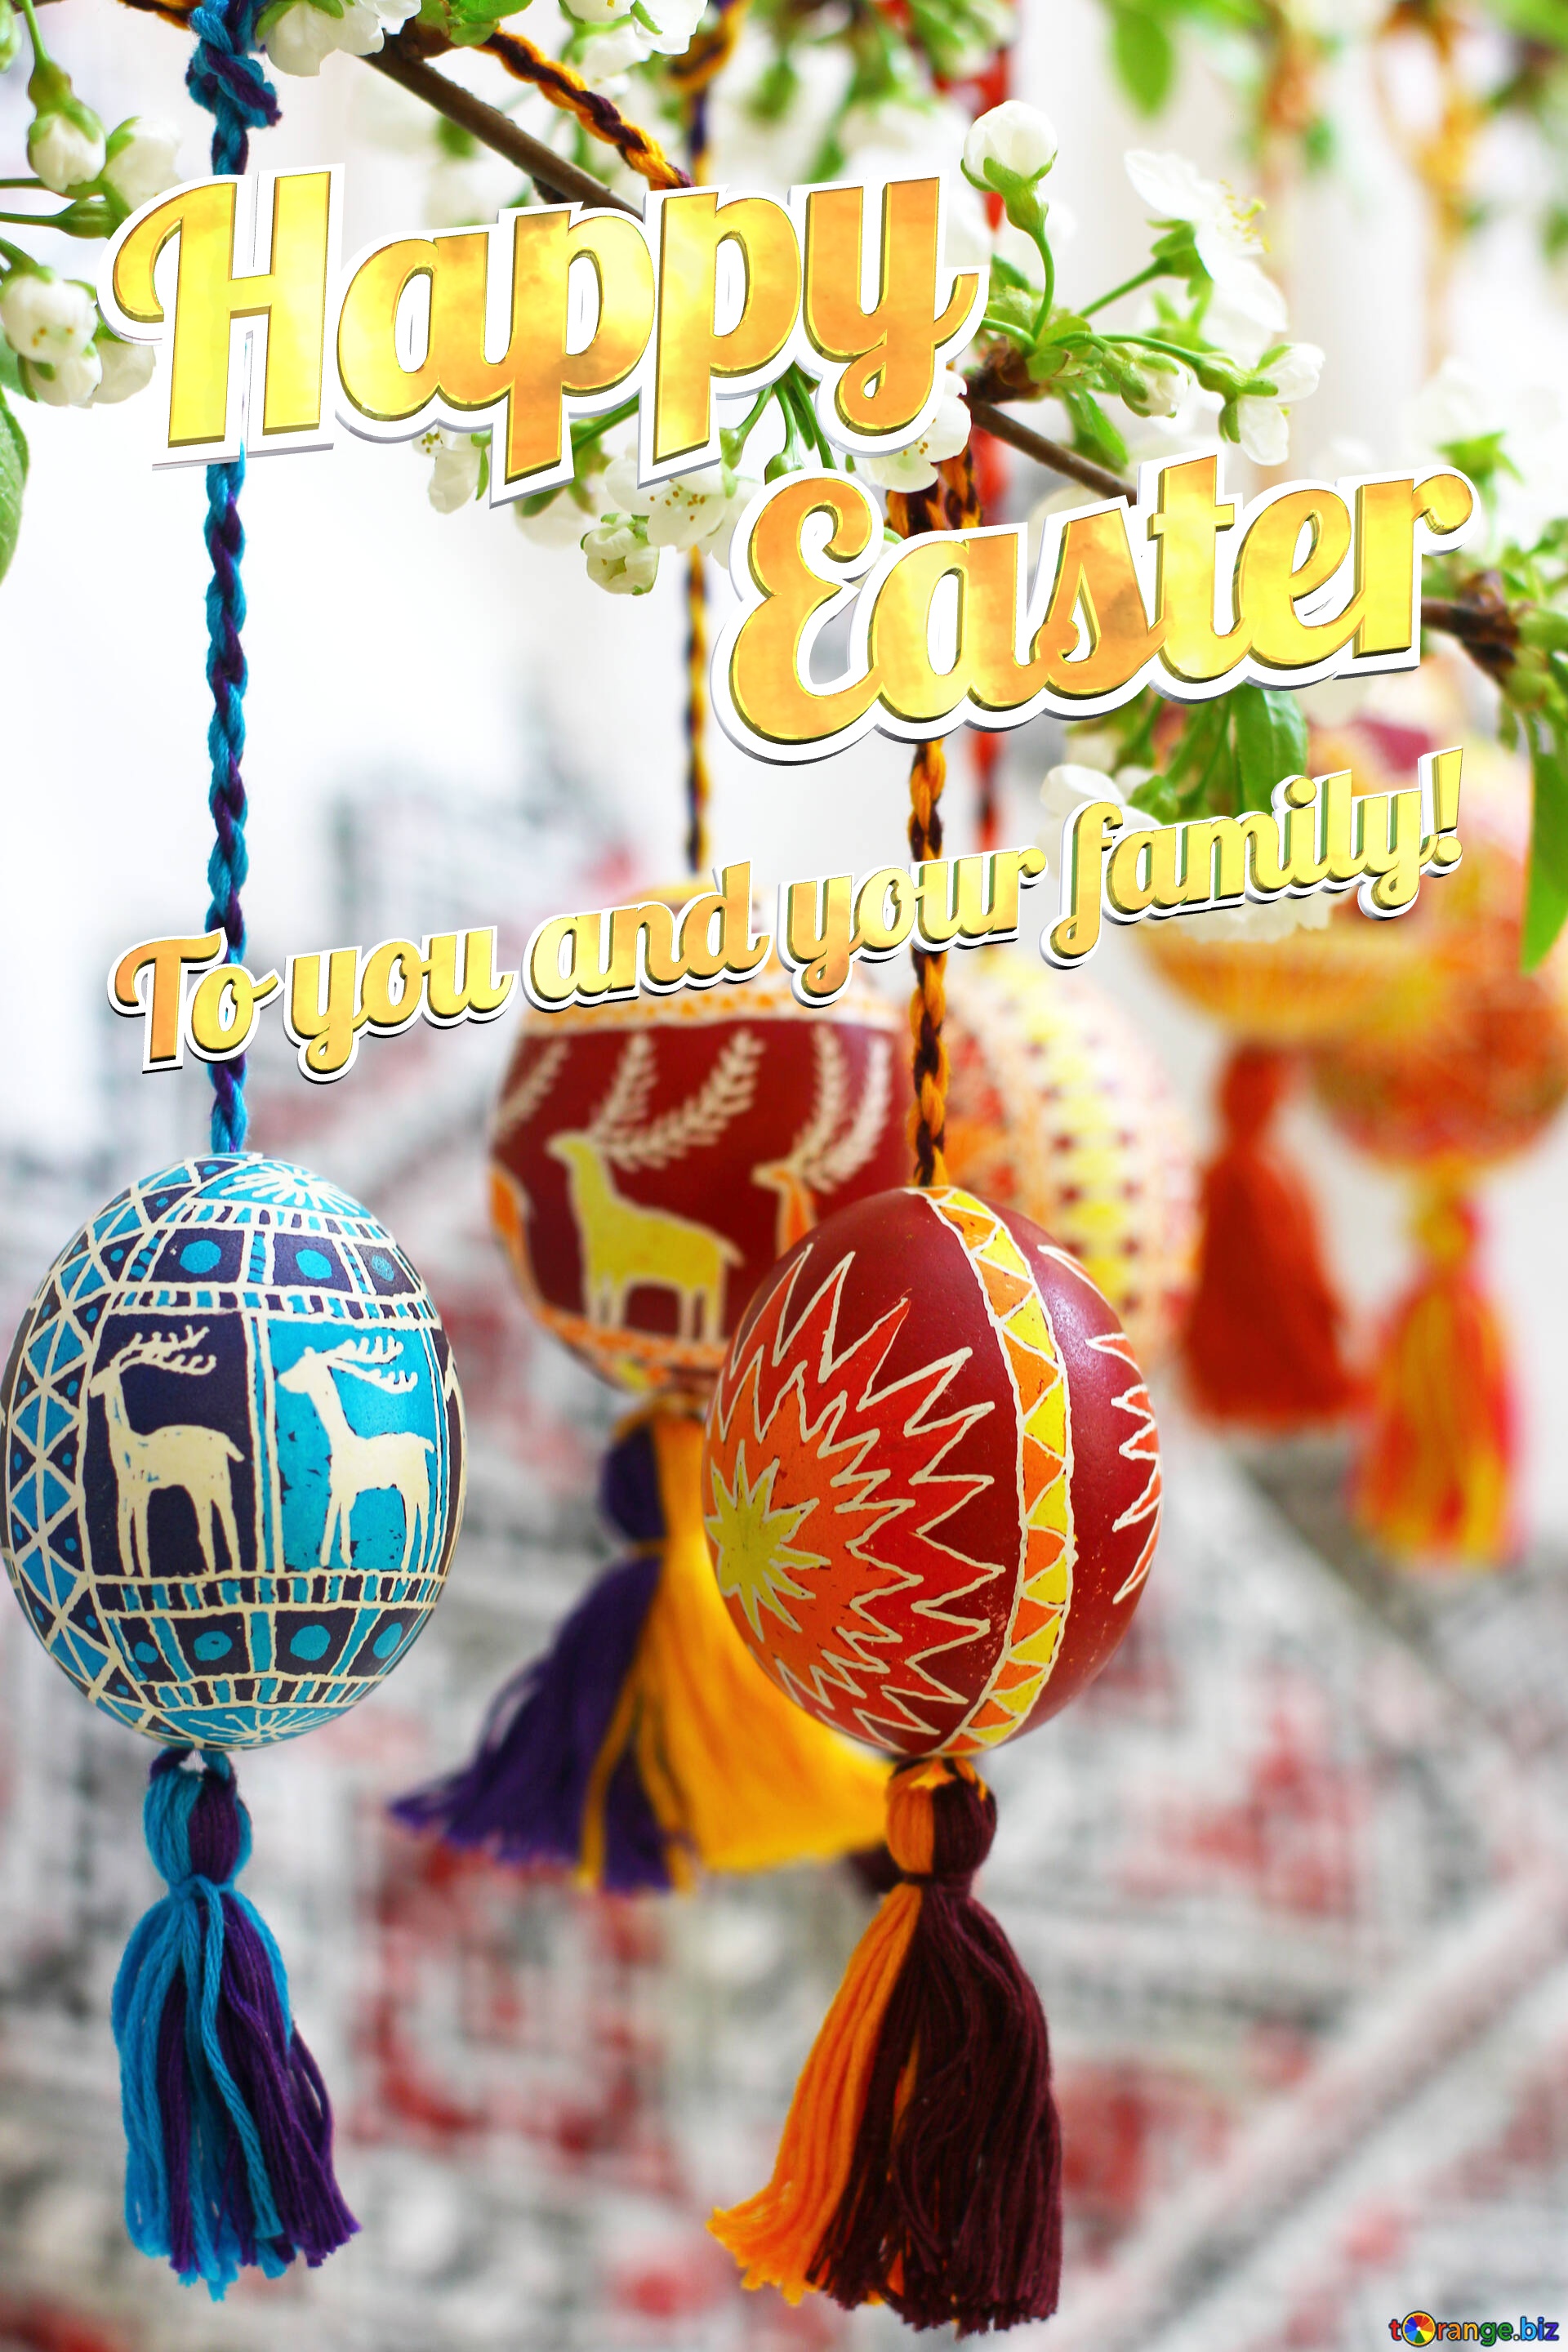 Wishes Happy Easter To you and your family! Easter eggs hanging on tree №30223